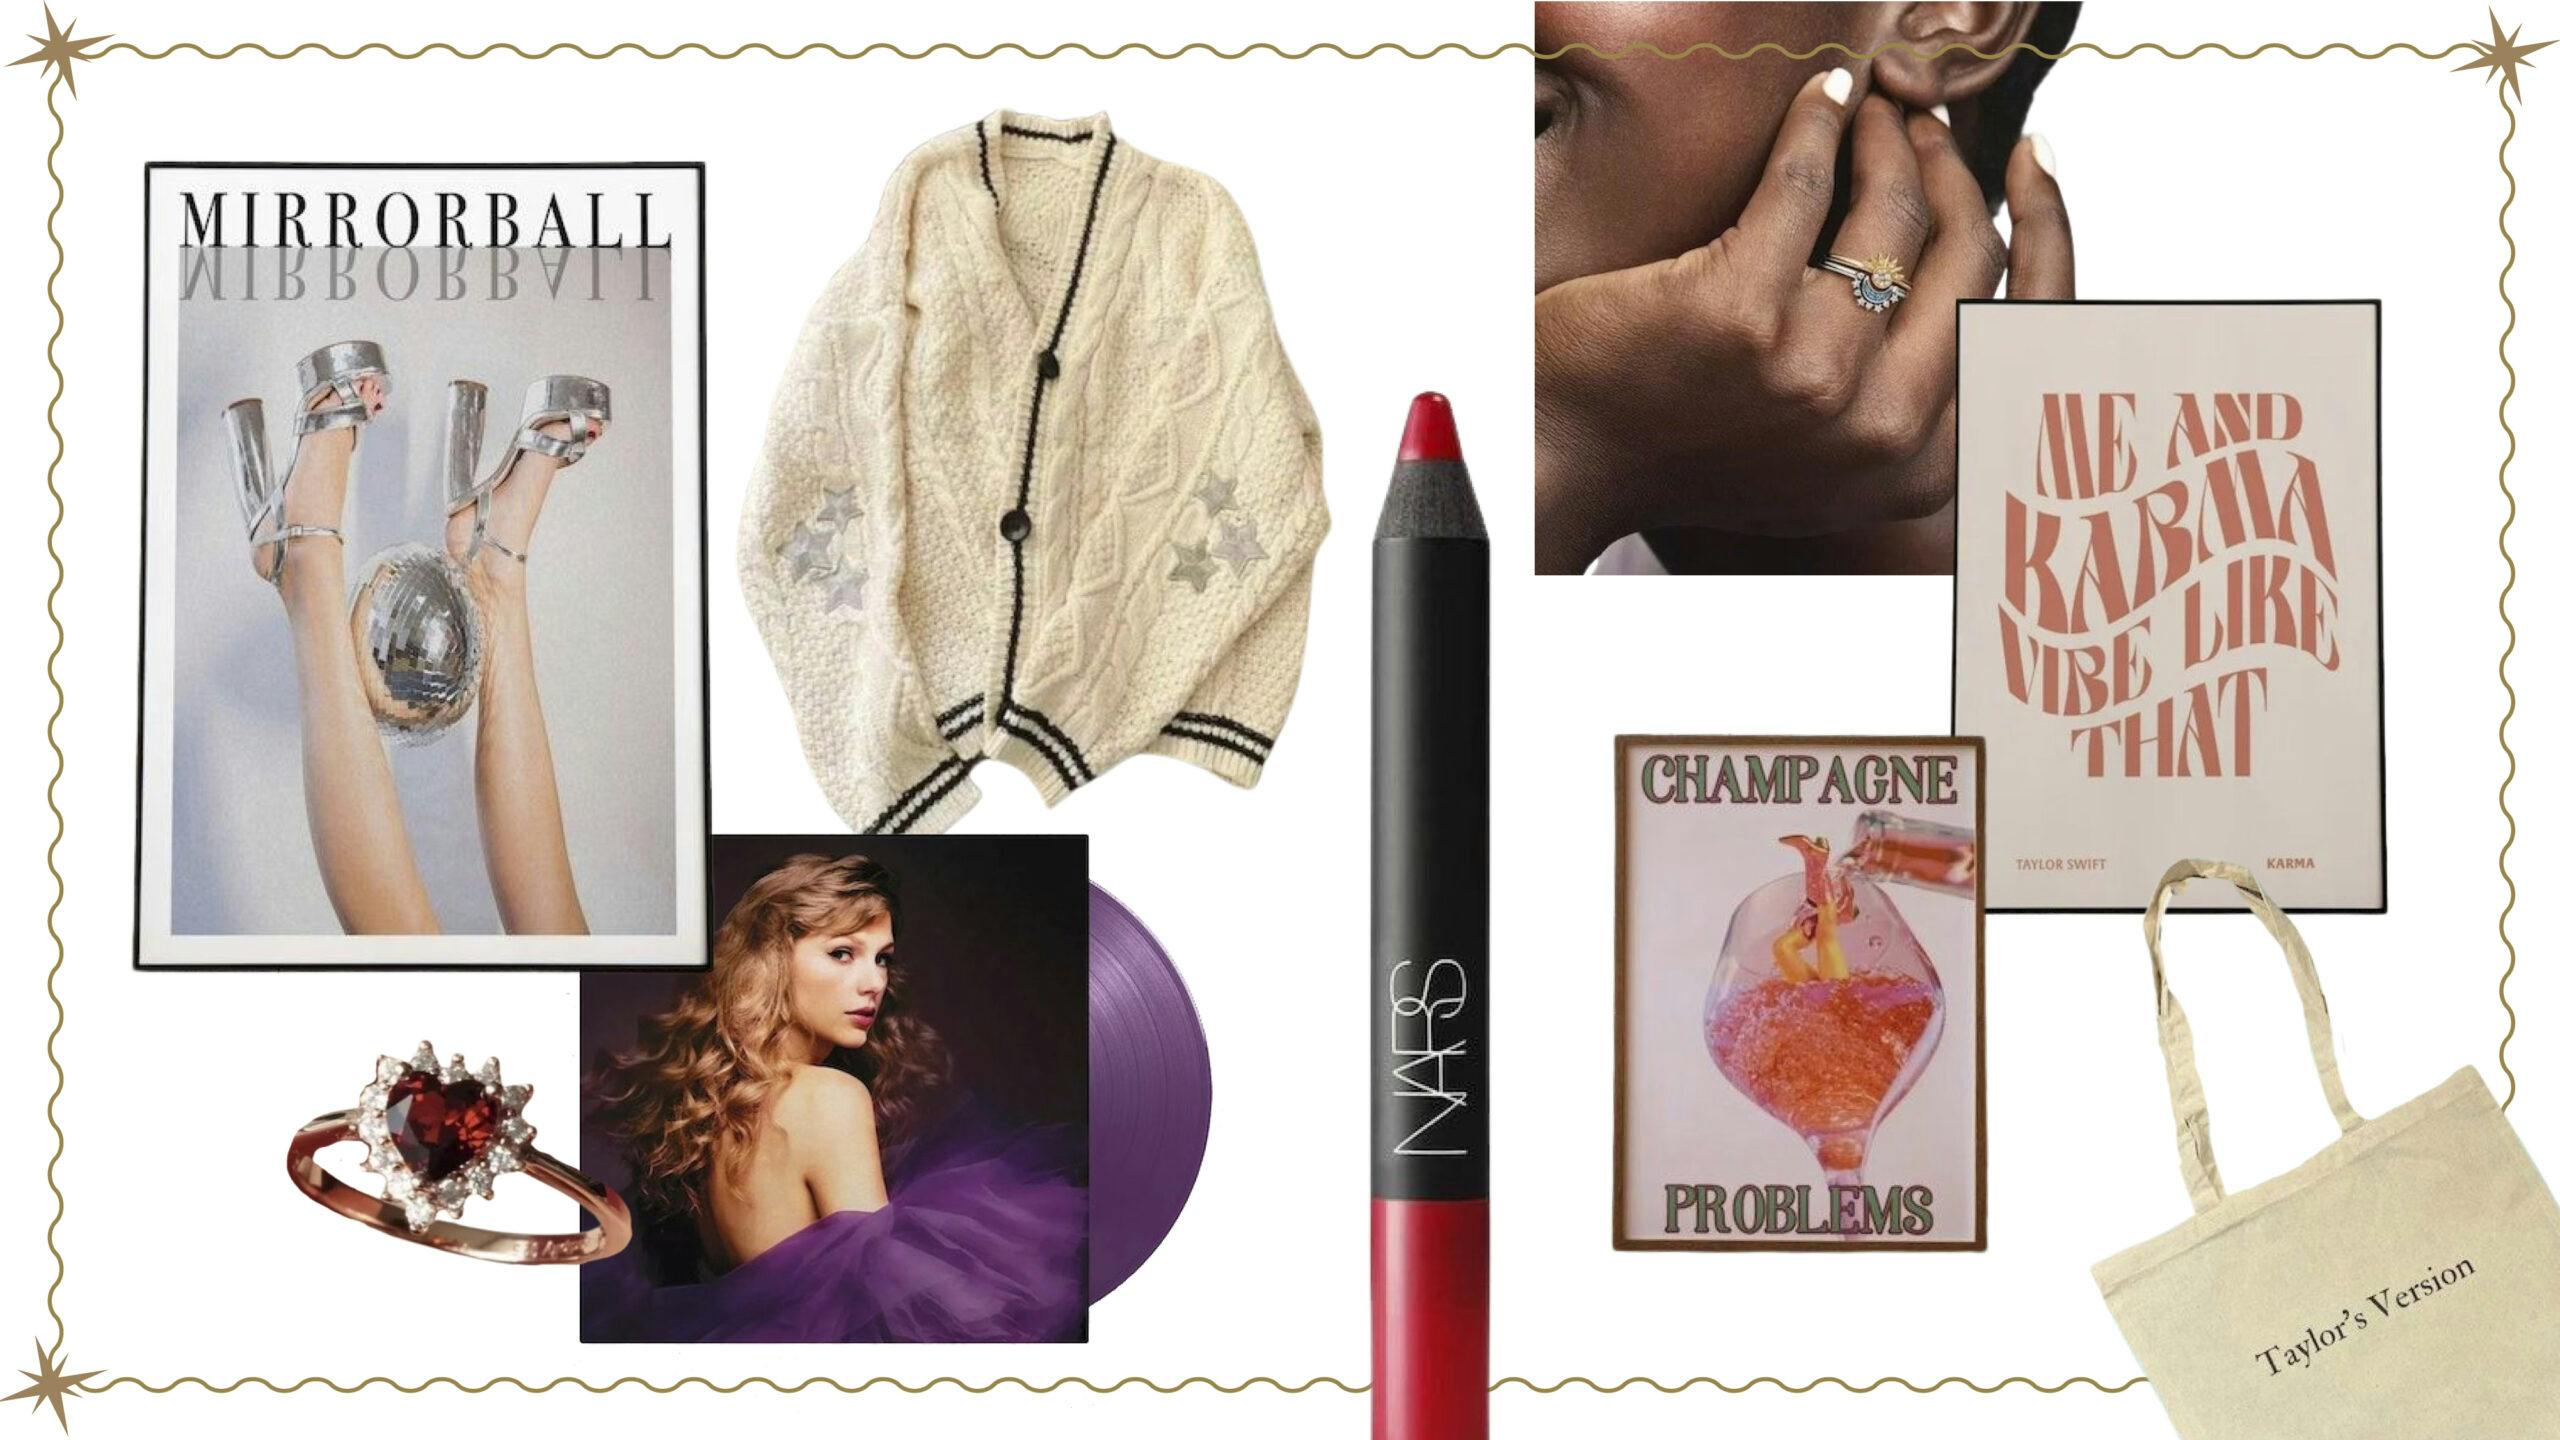 The Best Taylor Swift Fan Gifts 2024: Where To Shop